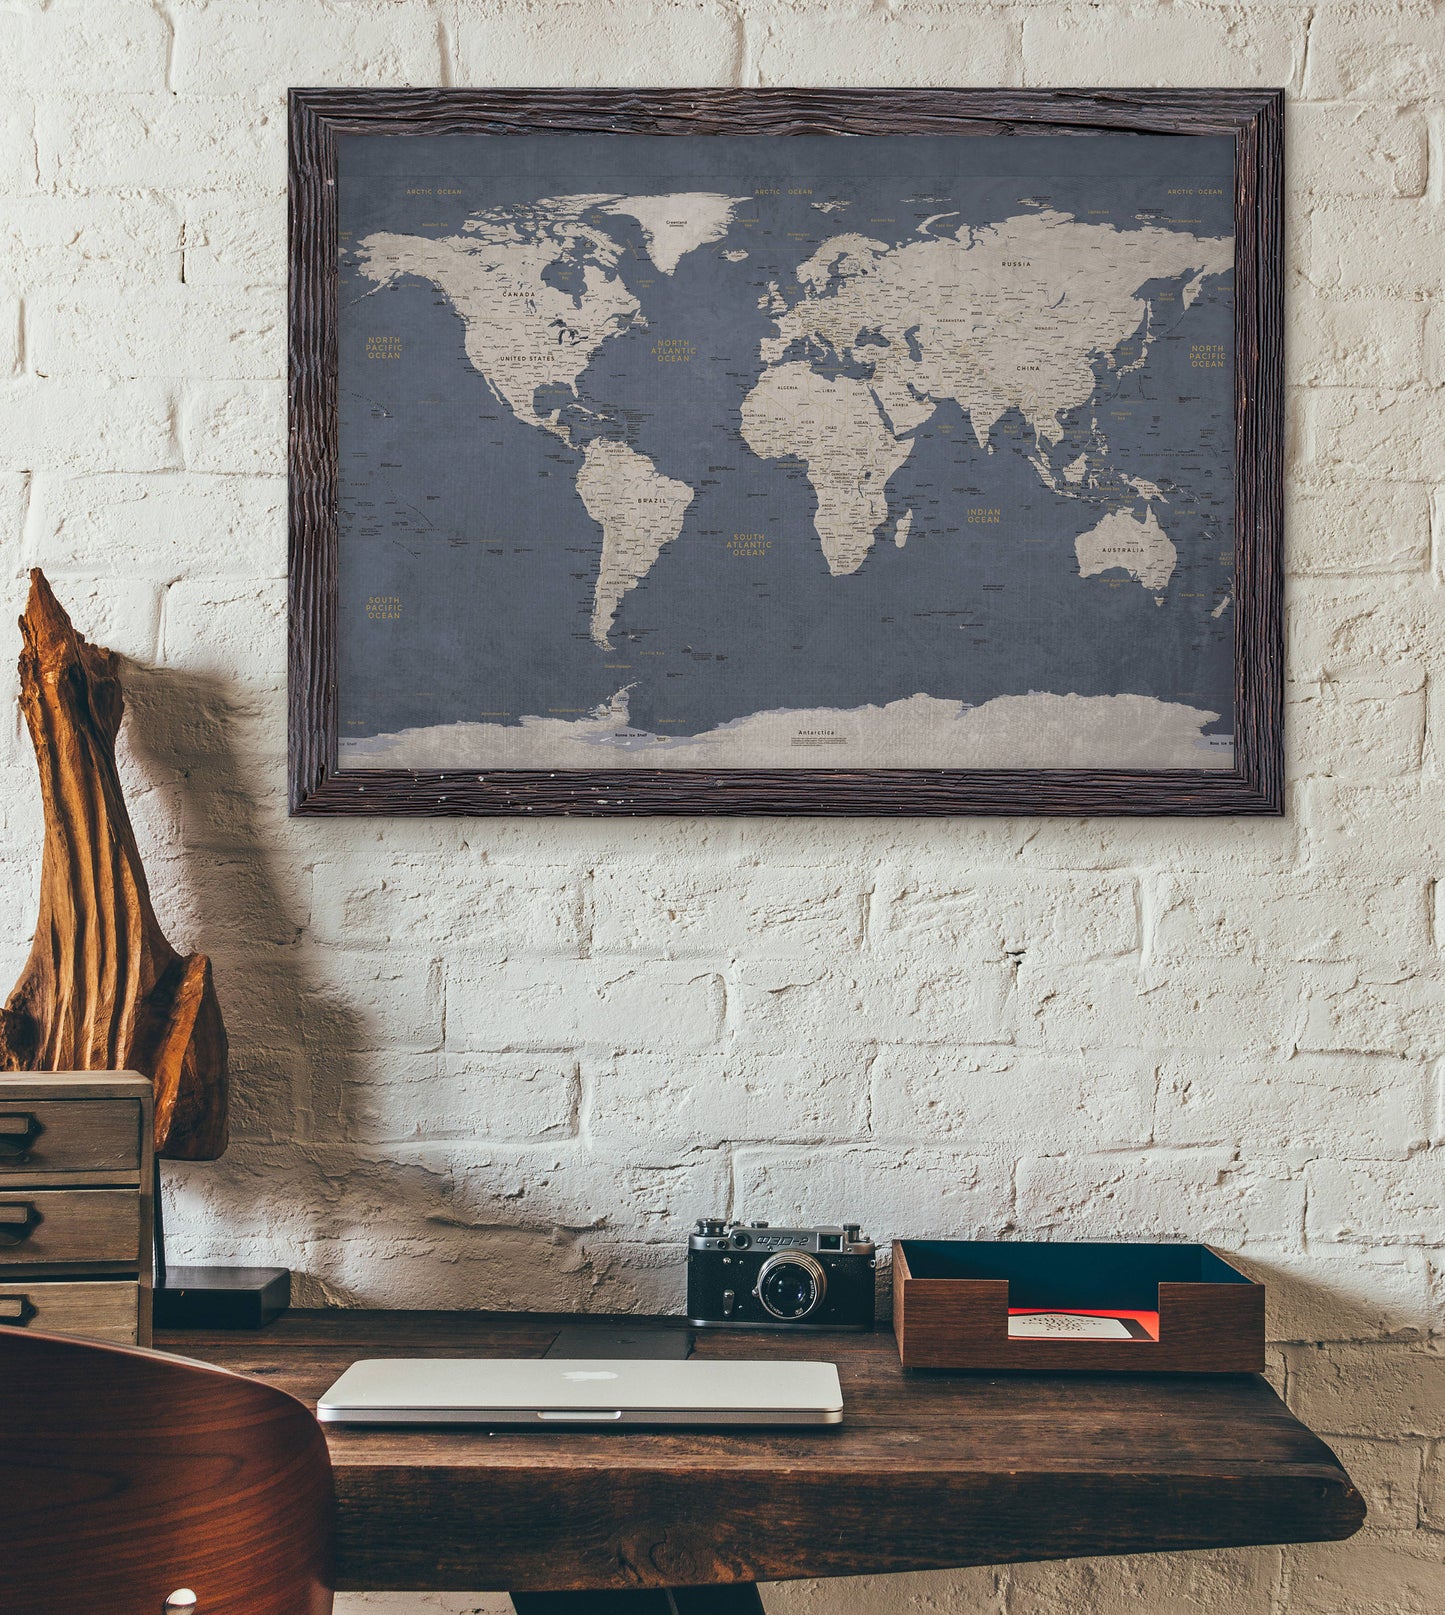 World Map Poster - Executive Style - KR Maps